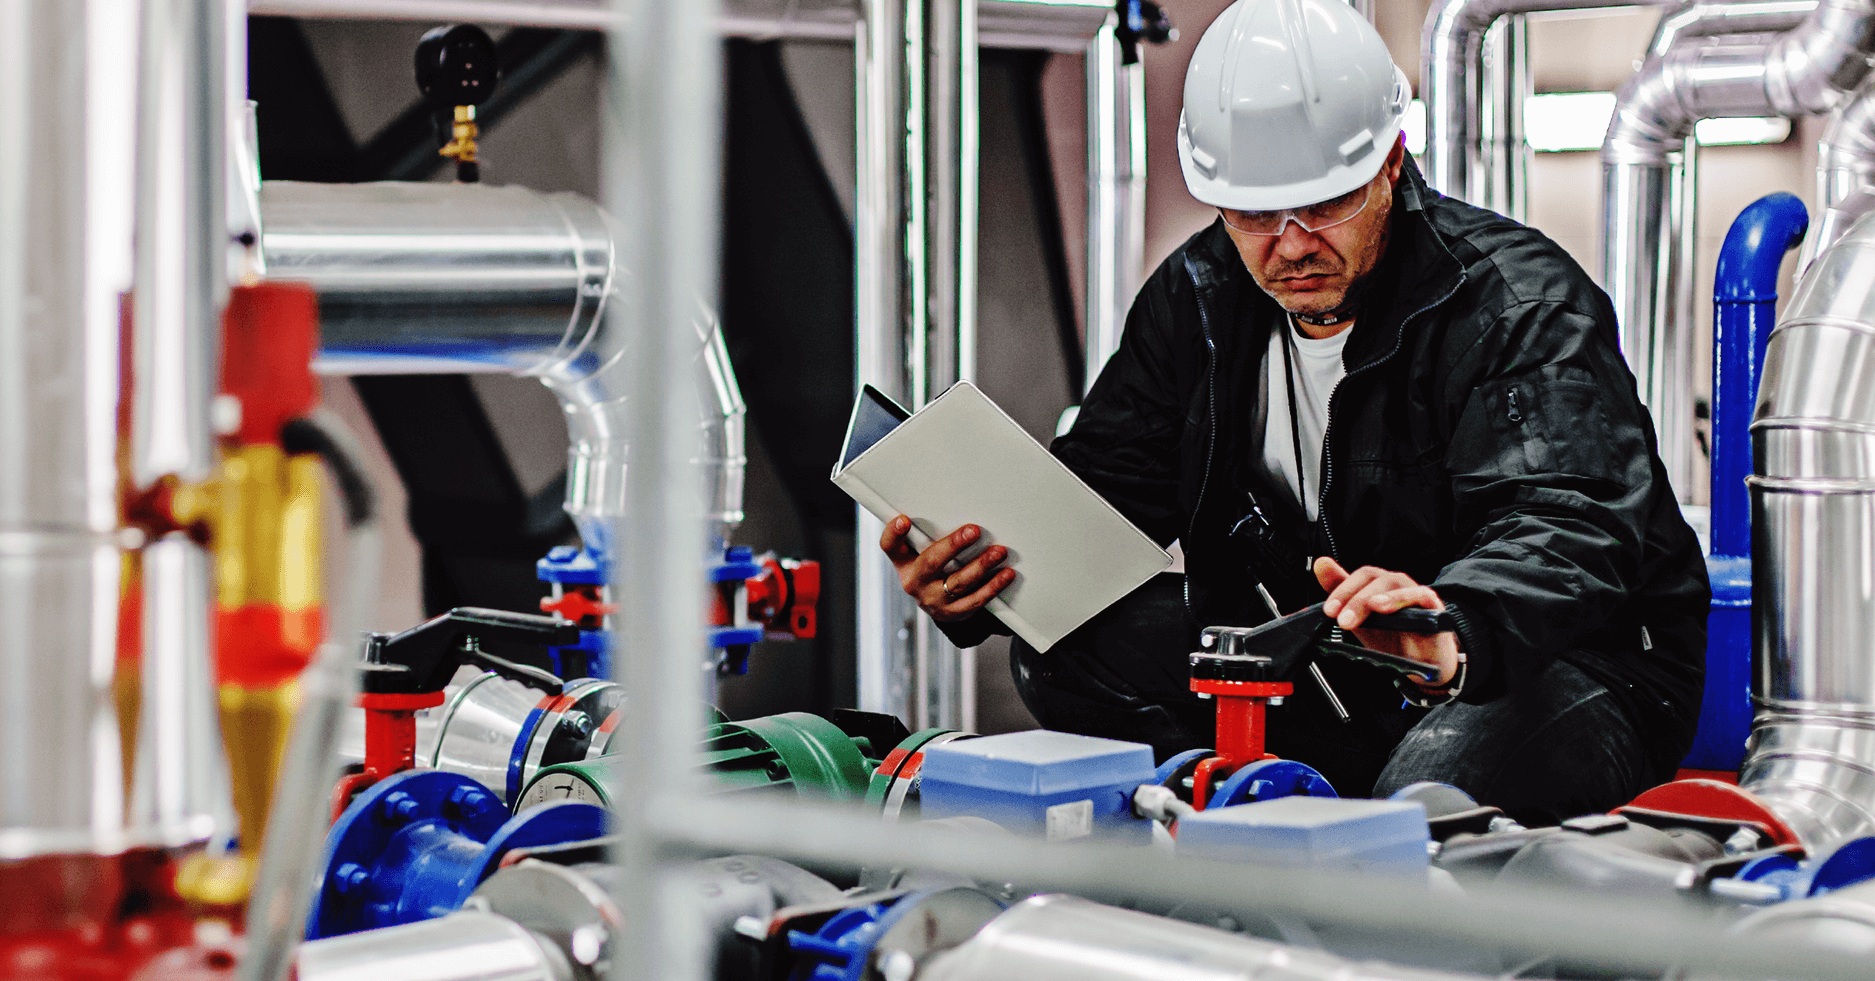 A worker in a jacket and wearing a hard hat works on a system.